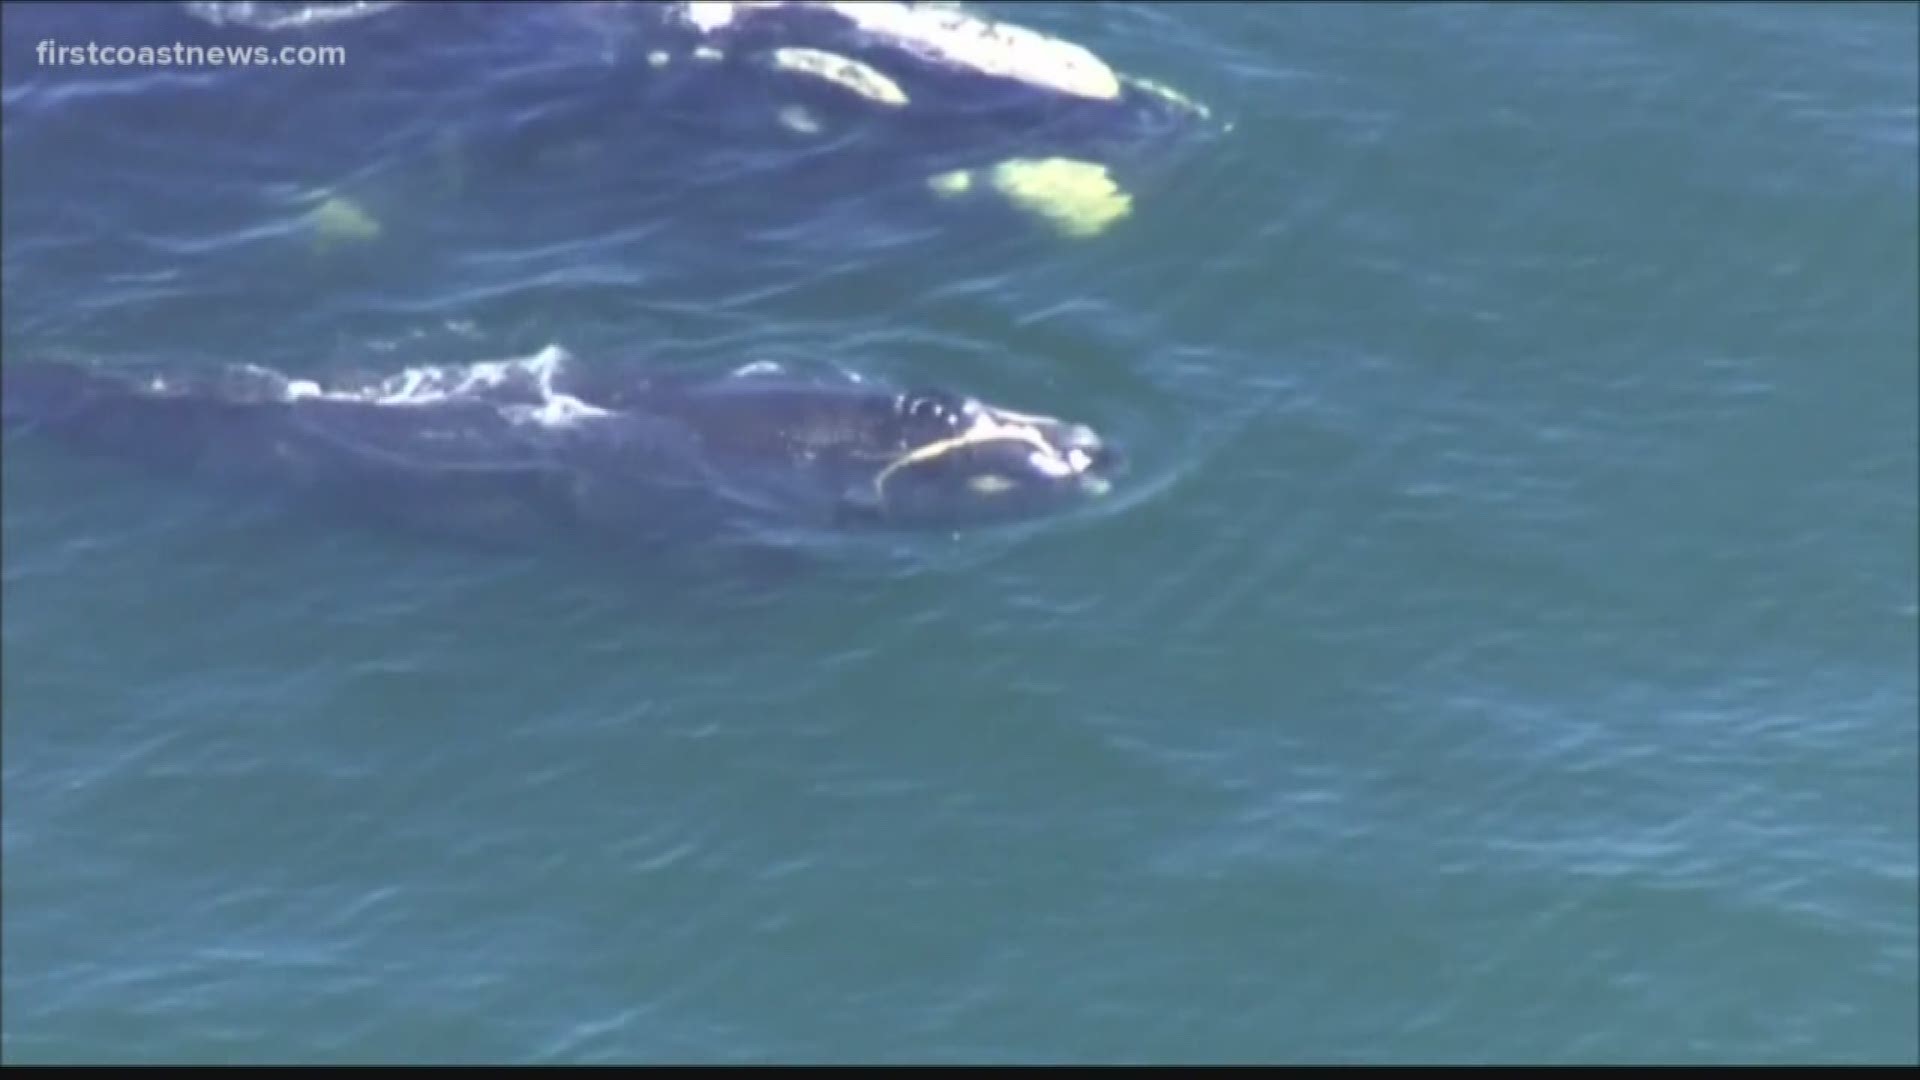 In the last week and a half, several right whales have been spotted off of South Carolina, Georgia, and Florida.